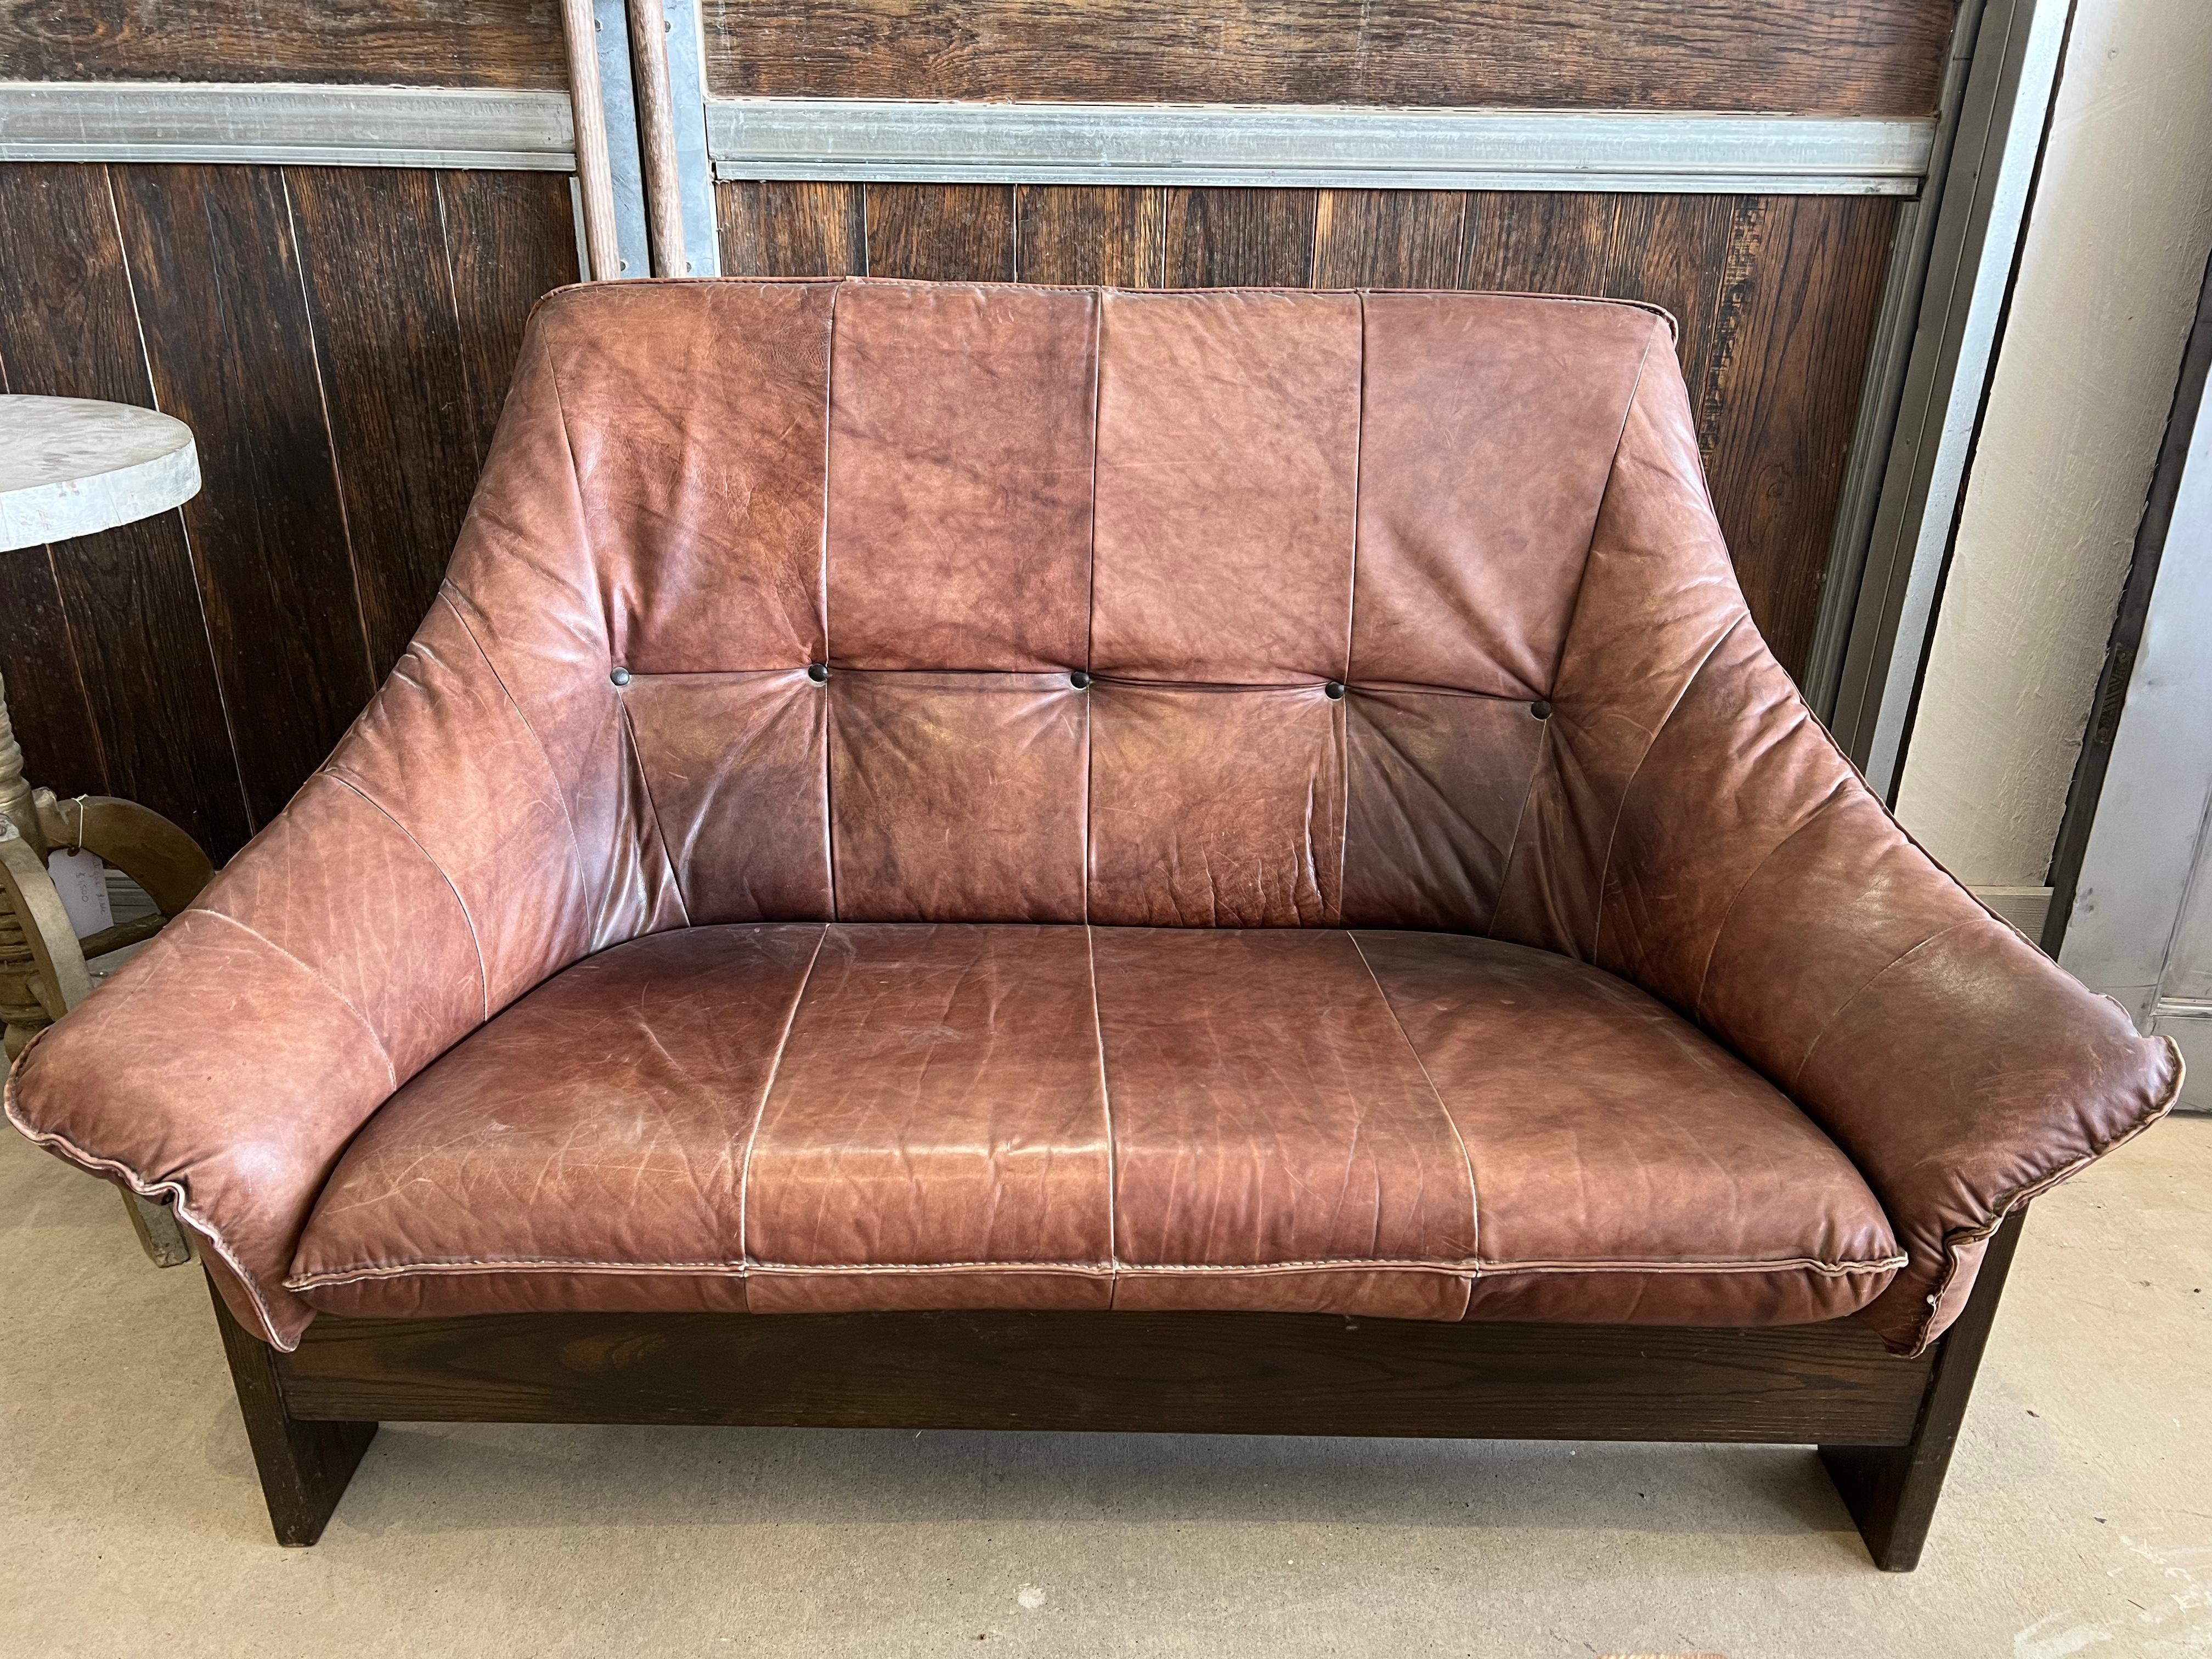 1970’s Swedish leather settee with wood base. Matching sofa and lounge chair are available.